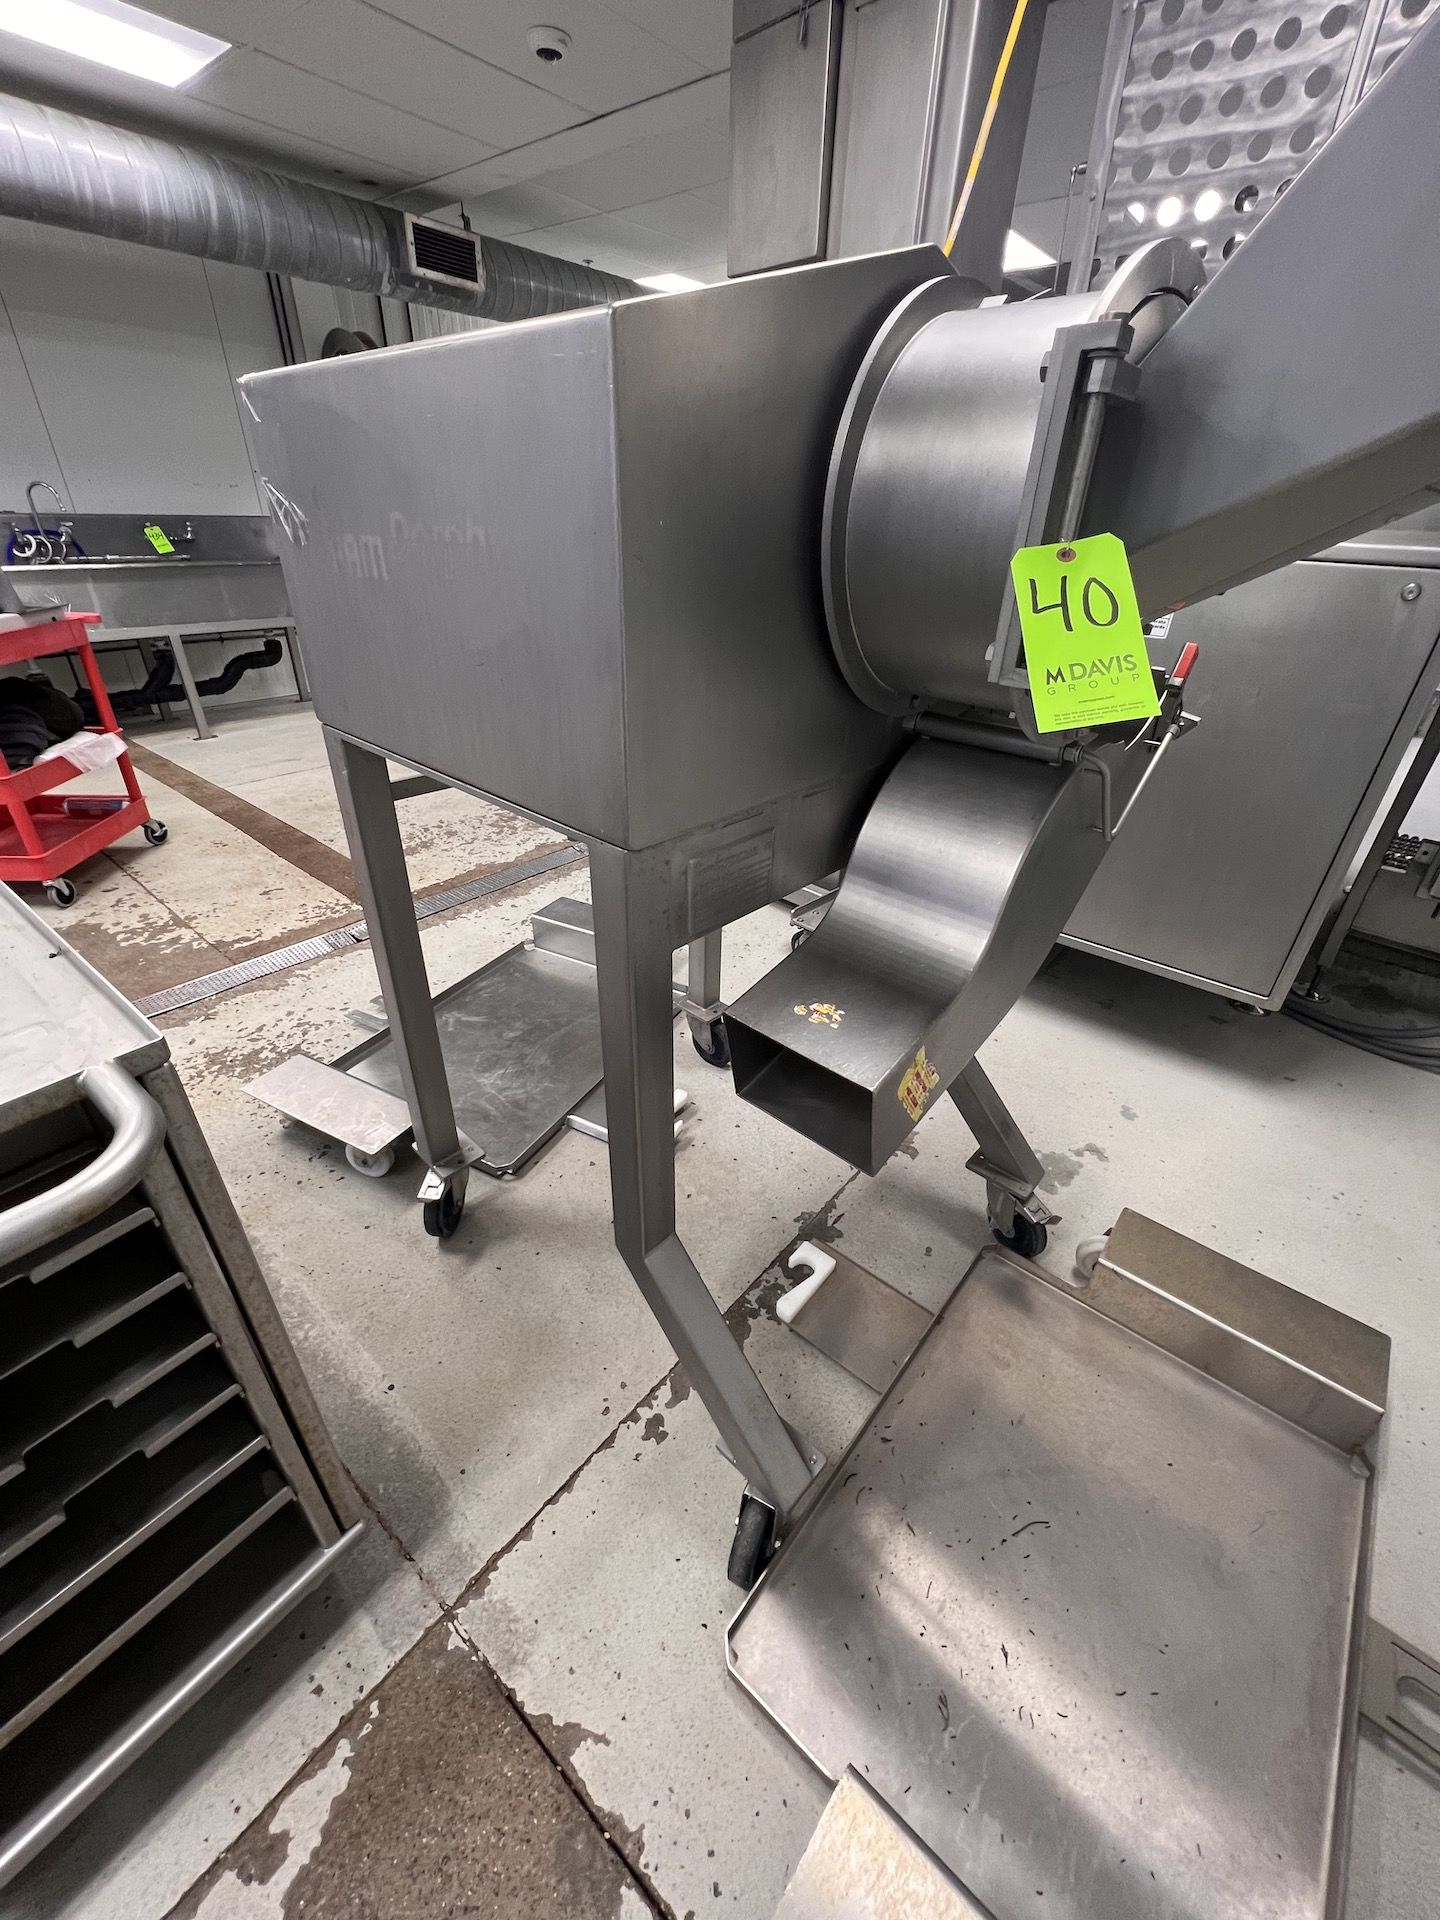 2014 FAM DORPHY S/S DICER, MODEL DORPHY, S/N 0015-5441, 2-HP, 230/60, 3 PHASE, INCLUDES (2) BOWL DO - Image 13 of 16